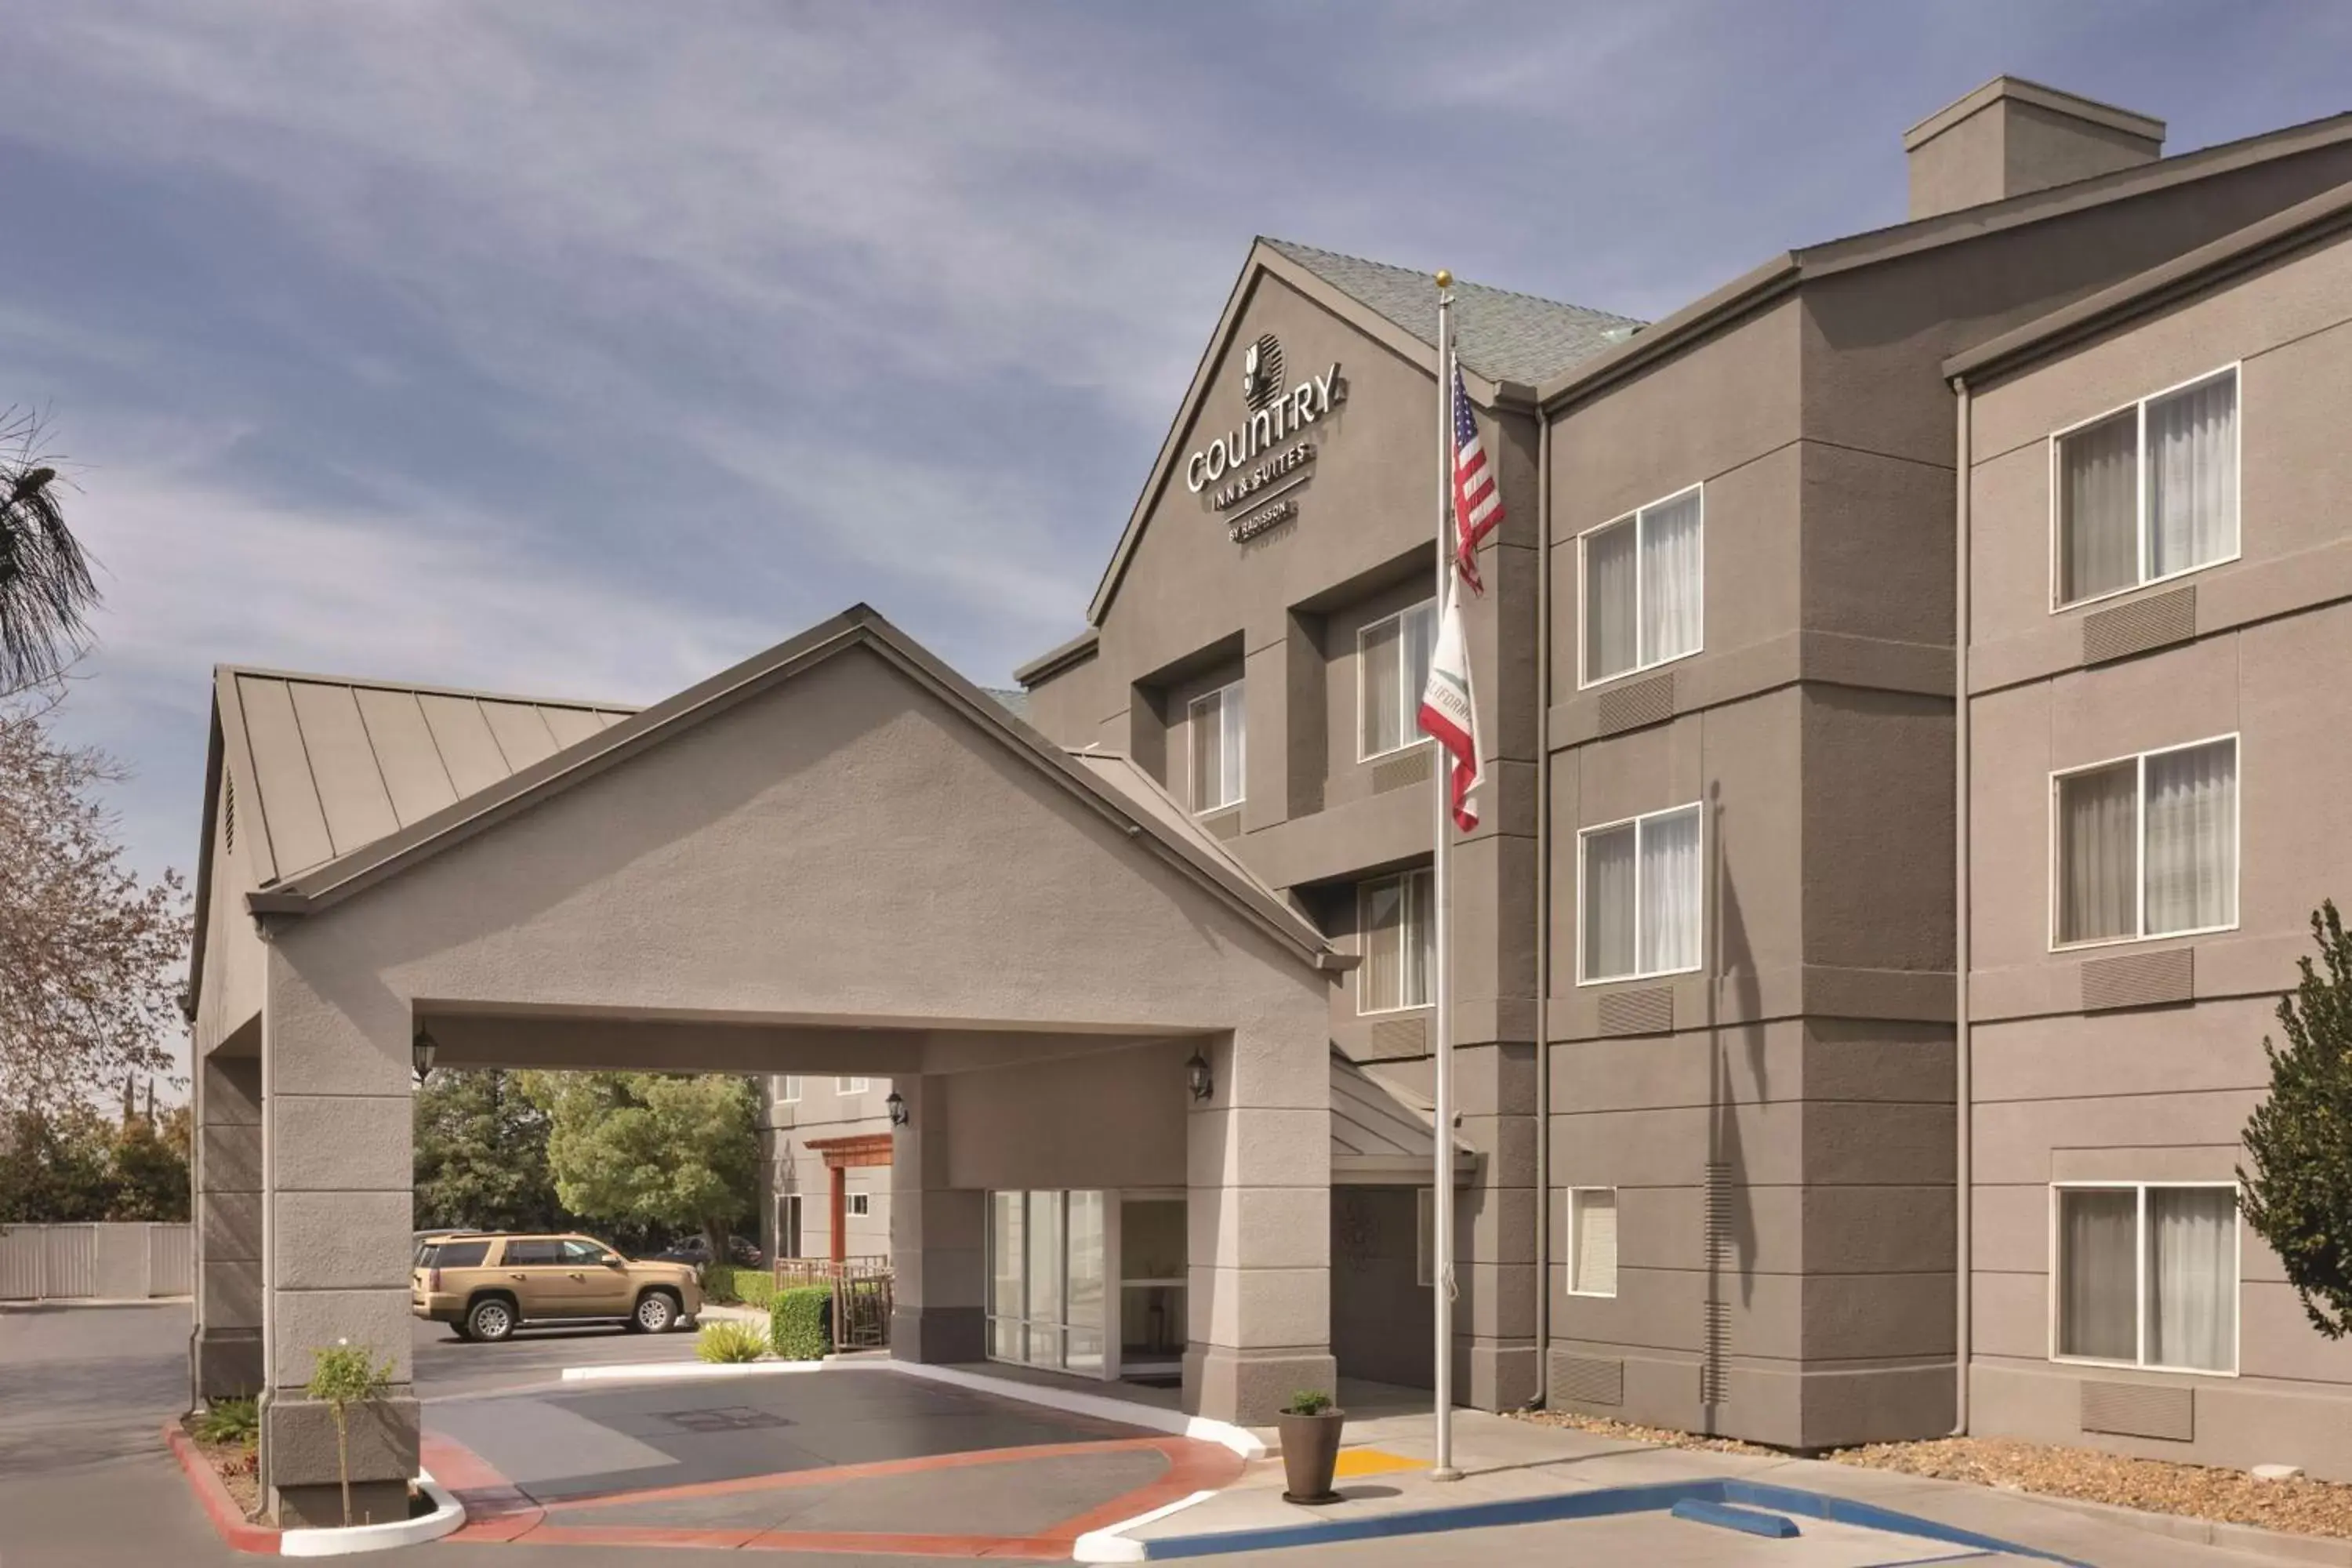 Property building in Country Inn & Suites by Radisson, Fresno North, CA